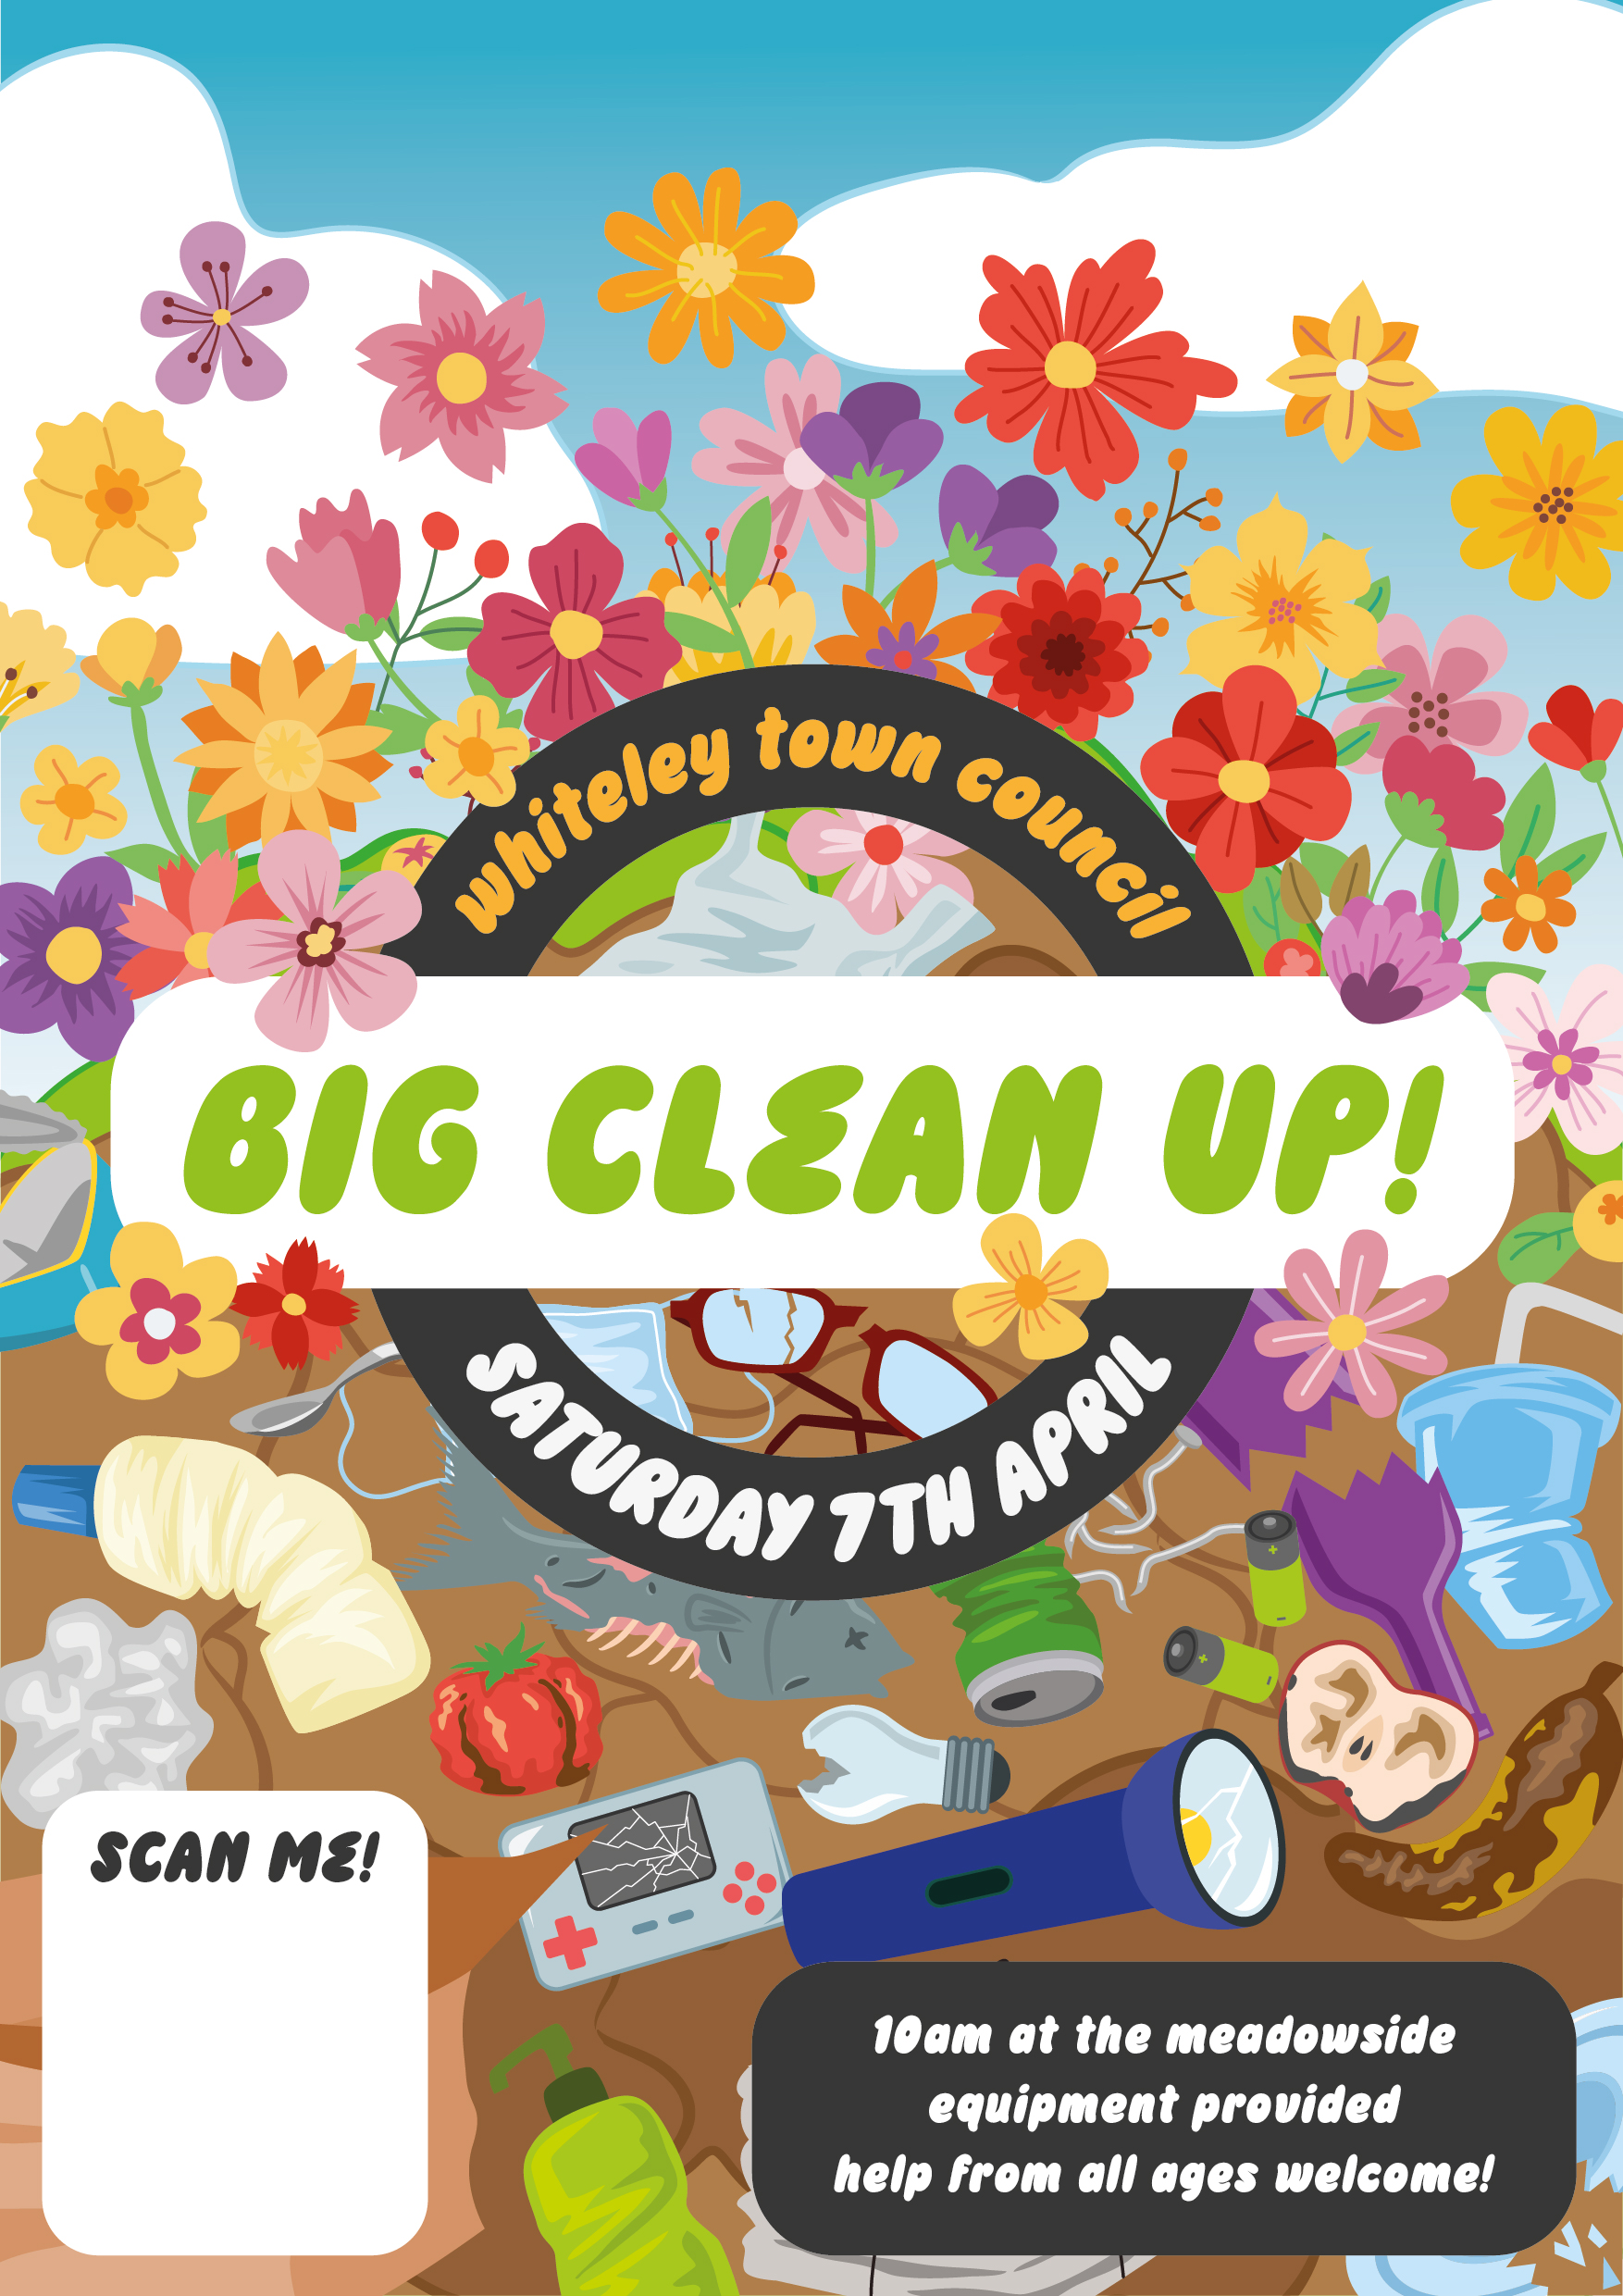 Whiteley Clean Up poster – WIP